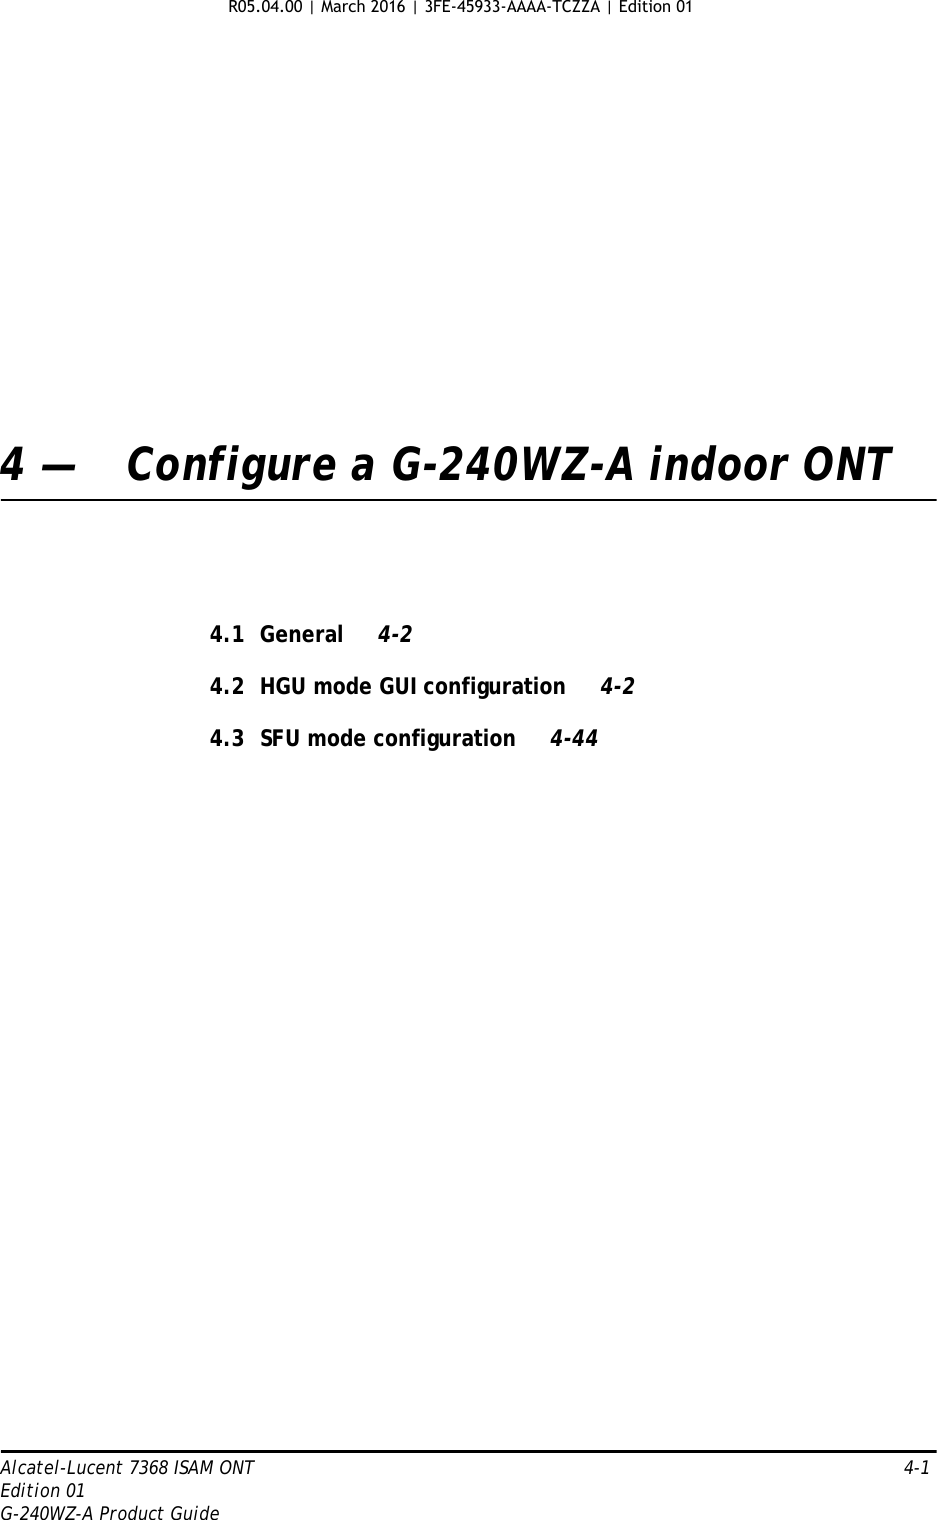 Alcatel-Lucent 7368 ISAM ONT   4-1Edition 01G-240WZ-A Product Guide4 — Configure a G-240WZ-A indoor ONT4.1 General 4-24.2 HGU mode GUI configuration 4-24.3 SFU mode configuration 4-44R05.04.00 | March 2016 | 3FE-45933-AAAA-TCZZA | Edition 01 